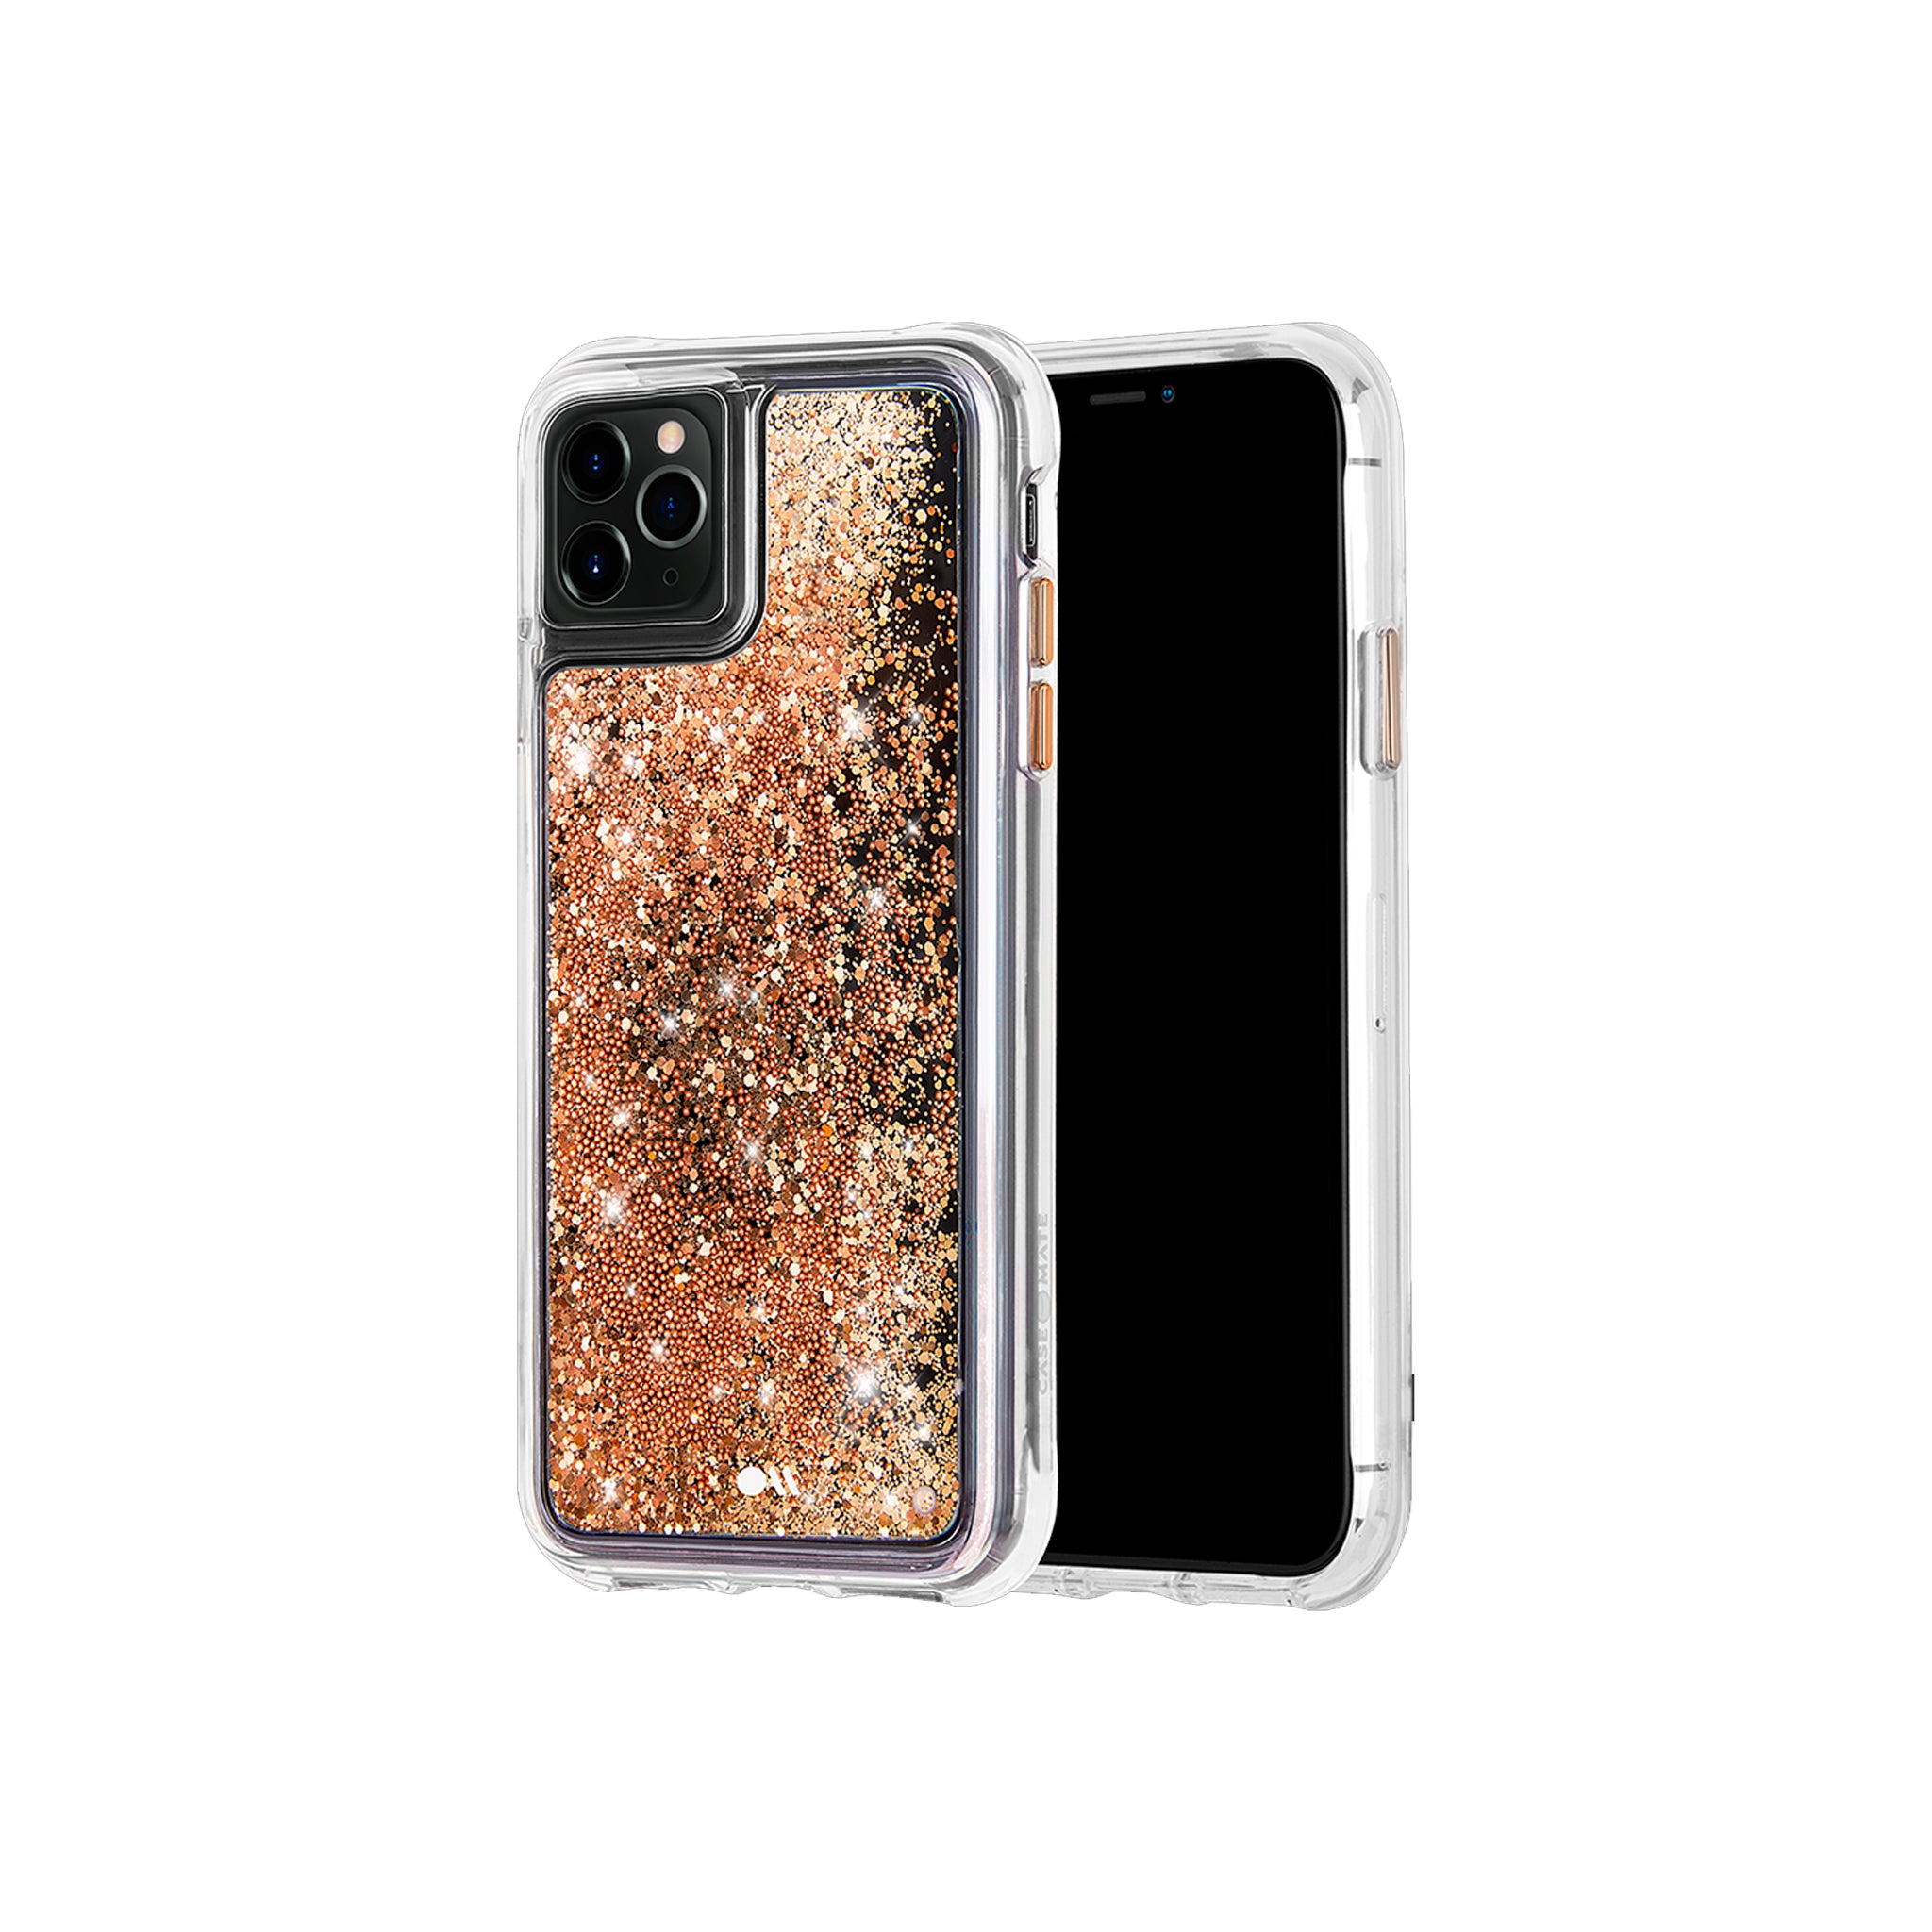 Case-mate - Waterfall Case For Apple iPhone 11 Pro - Gold